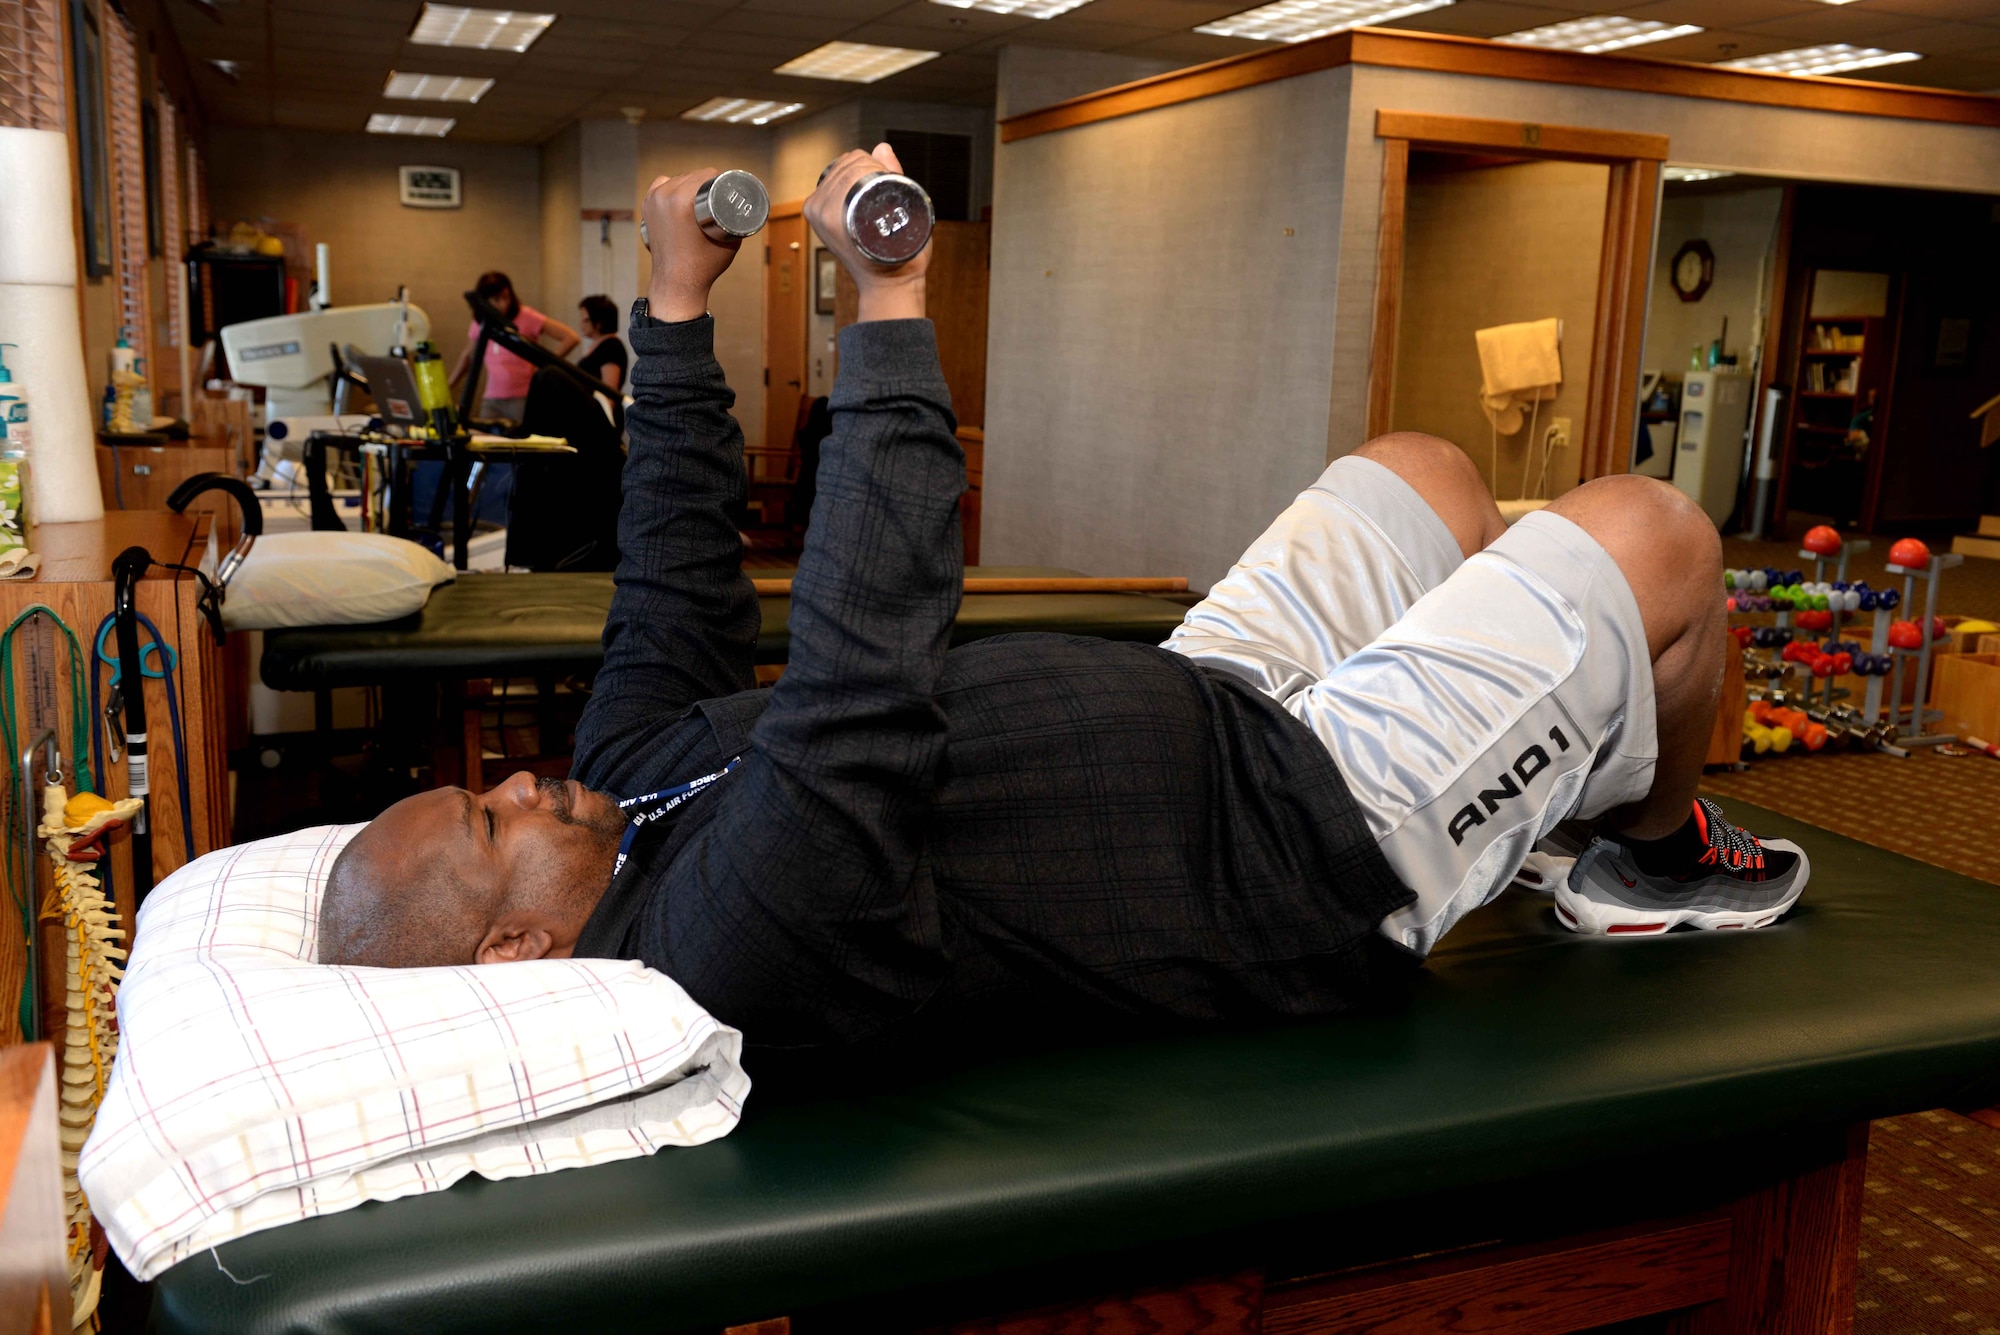 Donald Bell, 28th Bomb Wing equal opportunity director, lifts weight during a physical therapy session in Rapid City, S.D., Oct. 8, 2014. Bell is attending physical therapy due to recover movement in his left arm and leg that became paralyzed due to nerve damage in April. (U.S. Air Force photo by Airman 1st Class Rebecca Imwalle/Released)